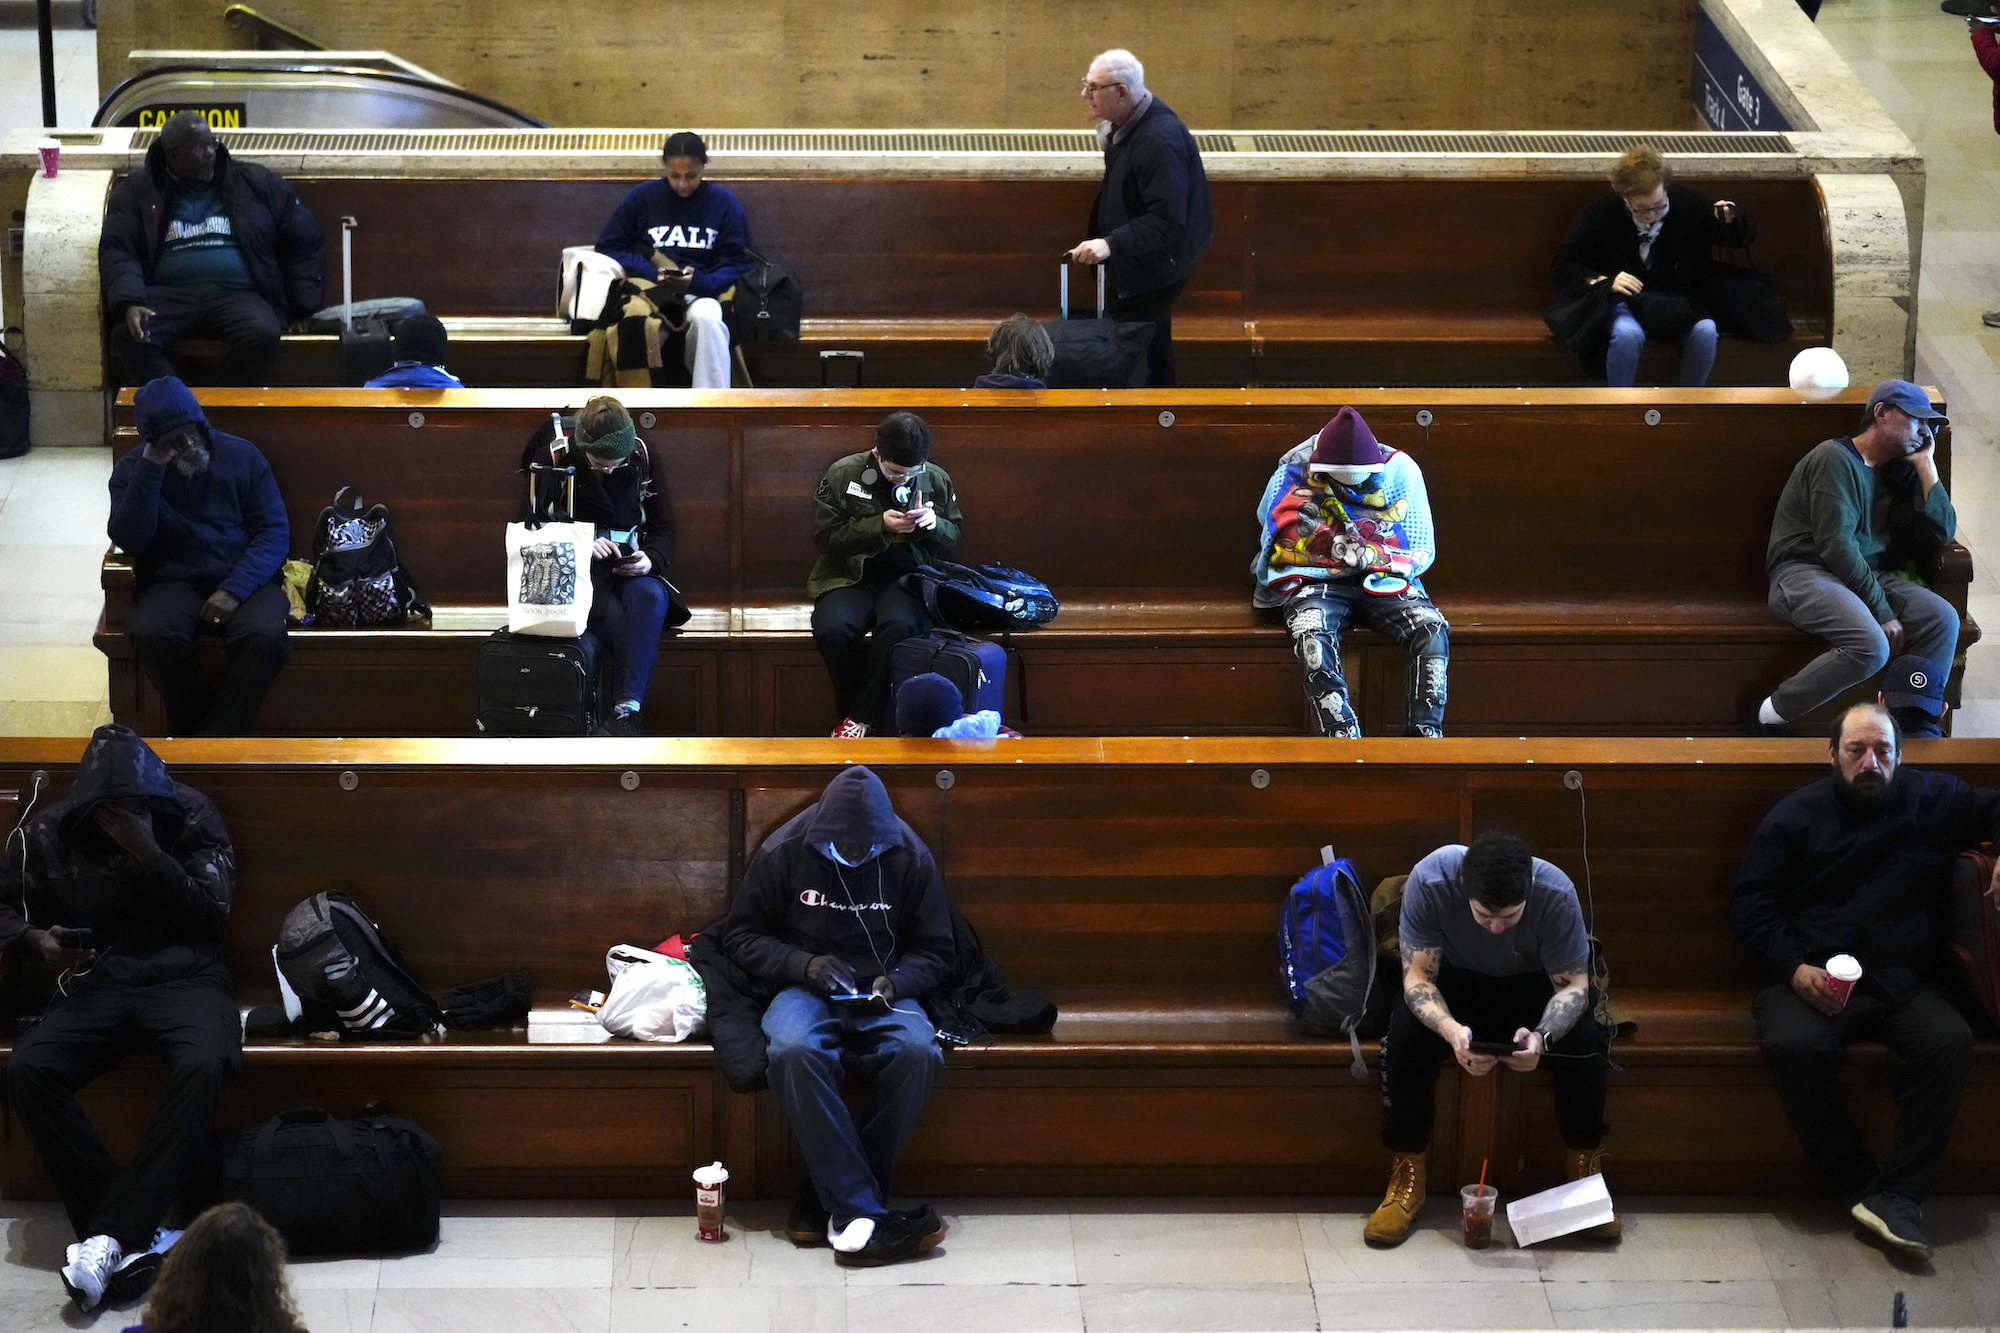 Passengers wait to board their Amtrak trains at 30th Street Station in Philadelphia on Wednesday.